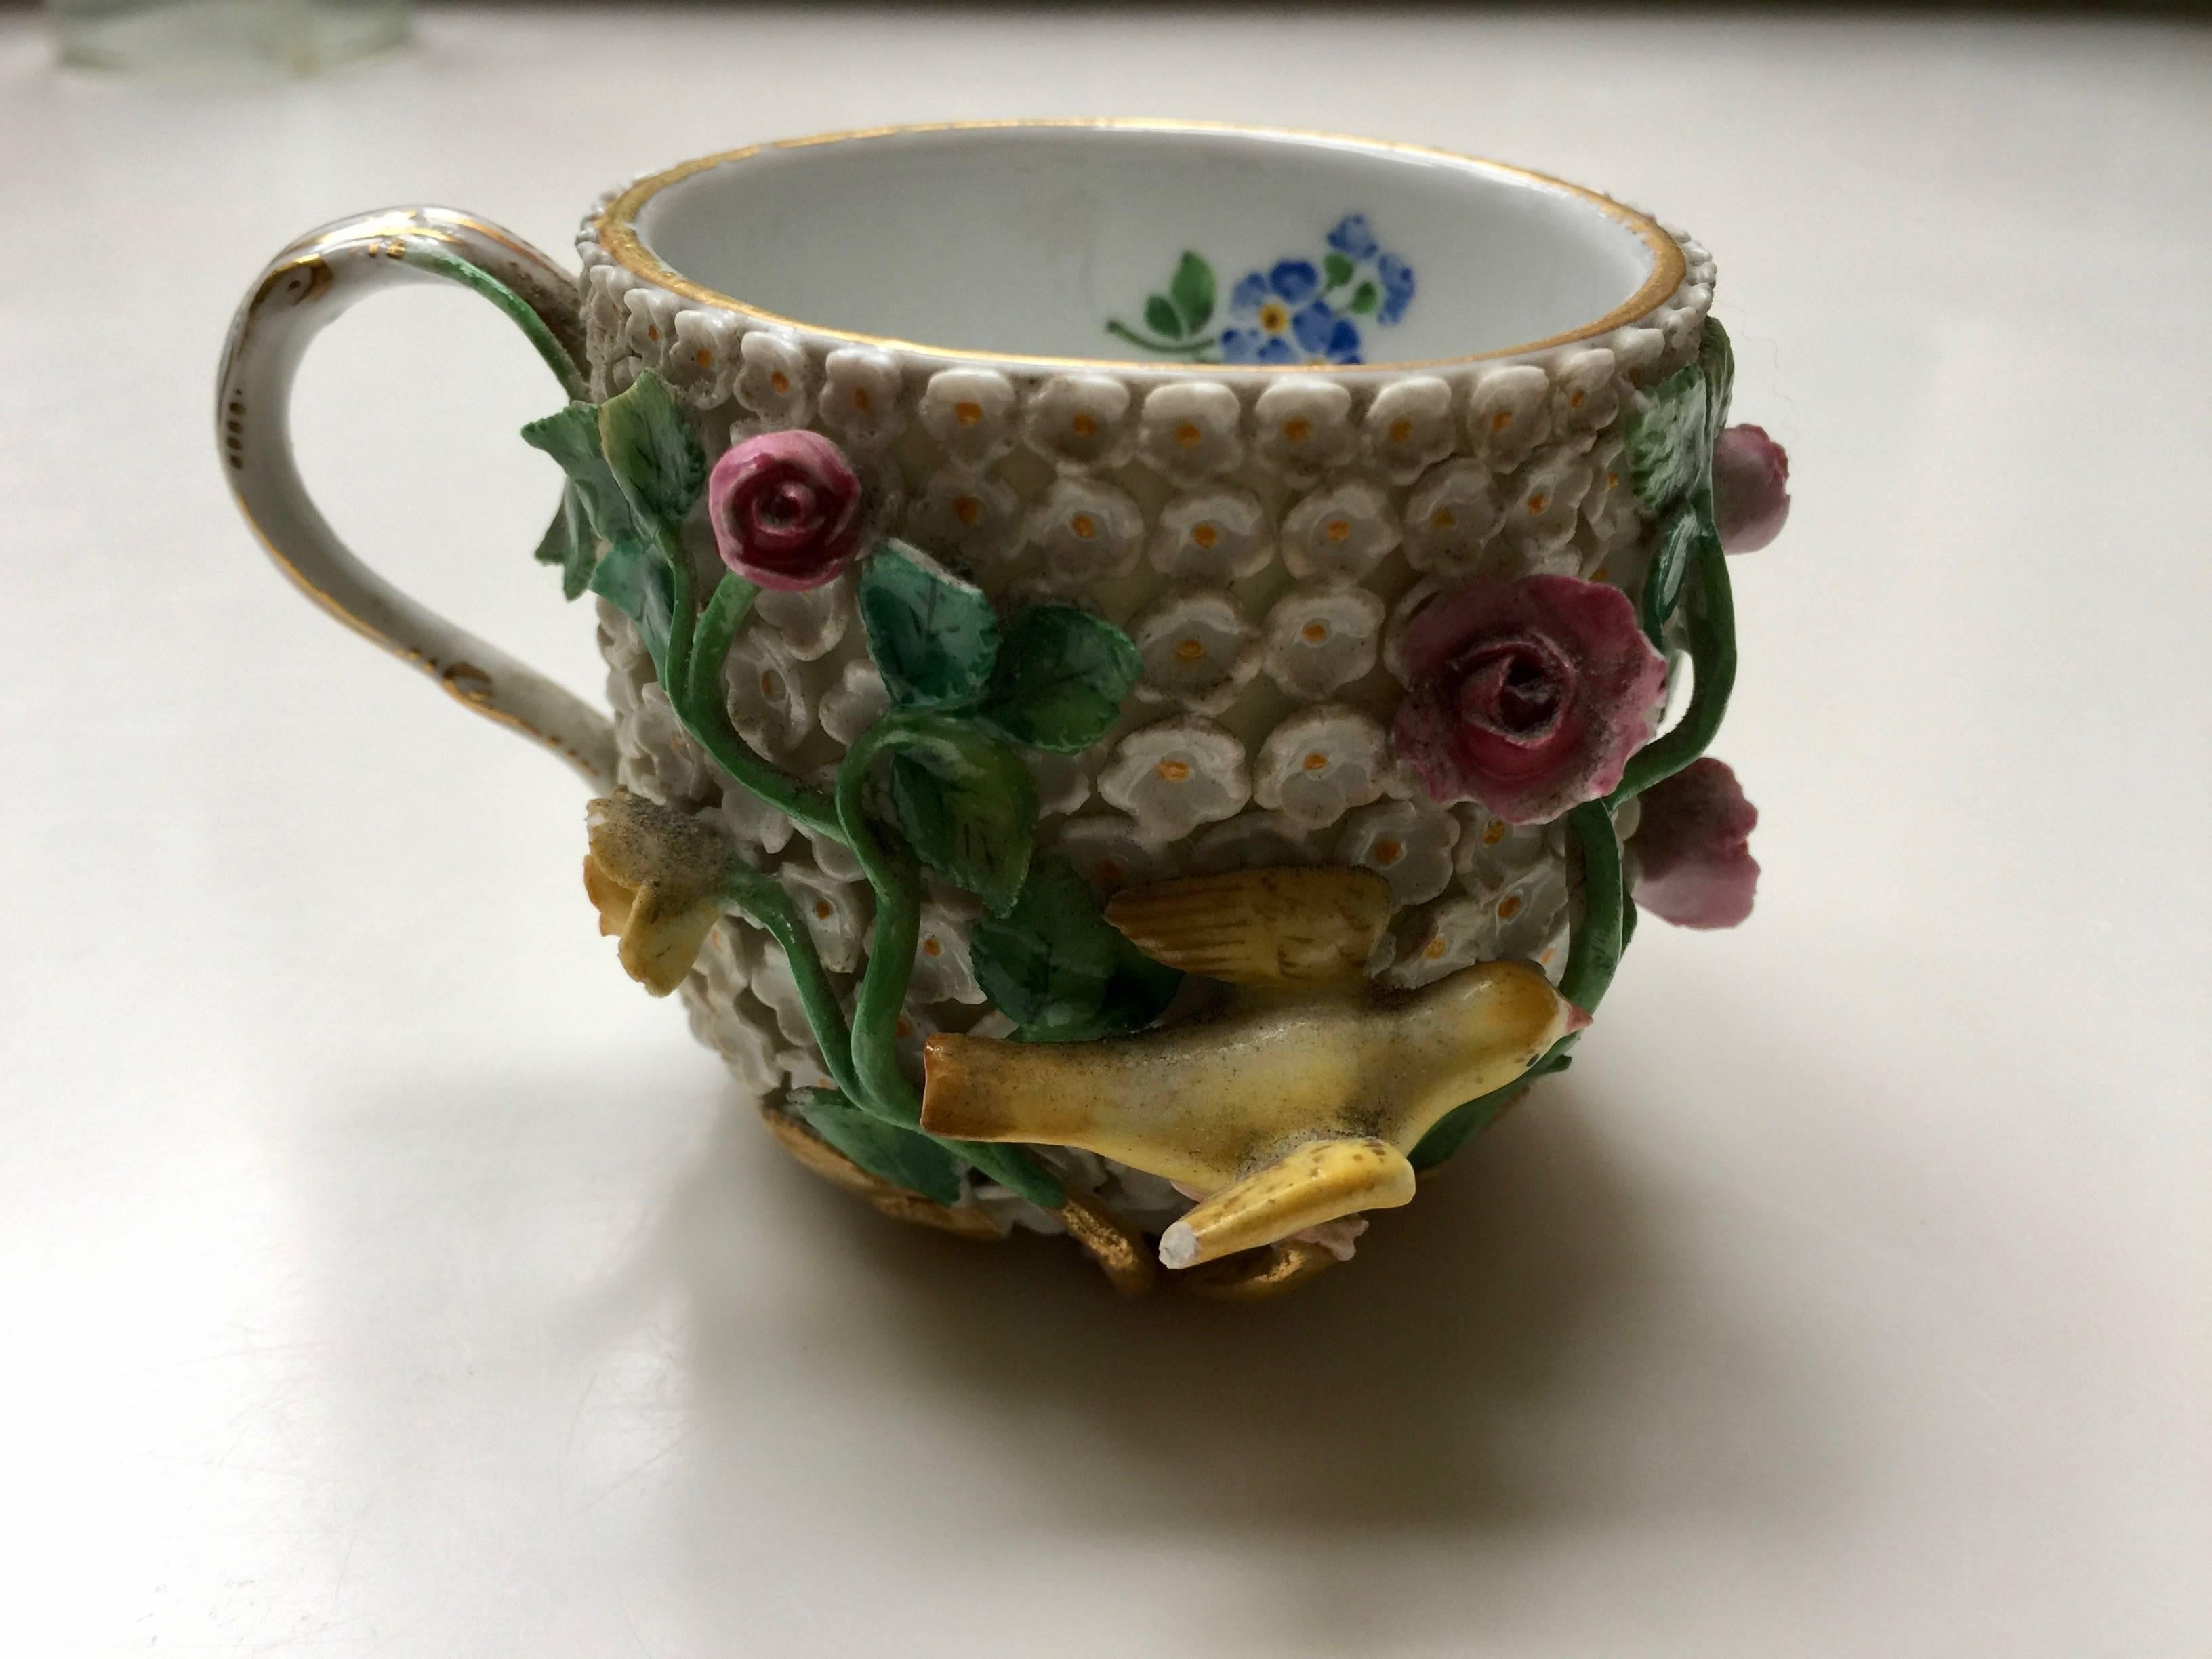 Meissen schneeballen cup and saucer, applied with flower heads throughout and yellow birds perched amongst scrolling foliage, underglaze blue crossed swords.

Measurements in inches:
Cup 2.5 D x 2.25 H
Saucer 5 D x 1.25 H.